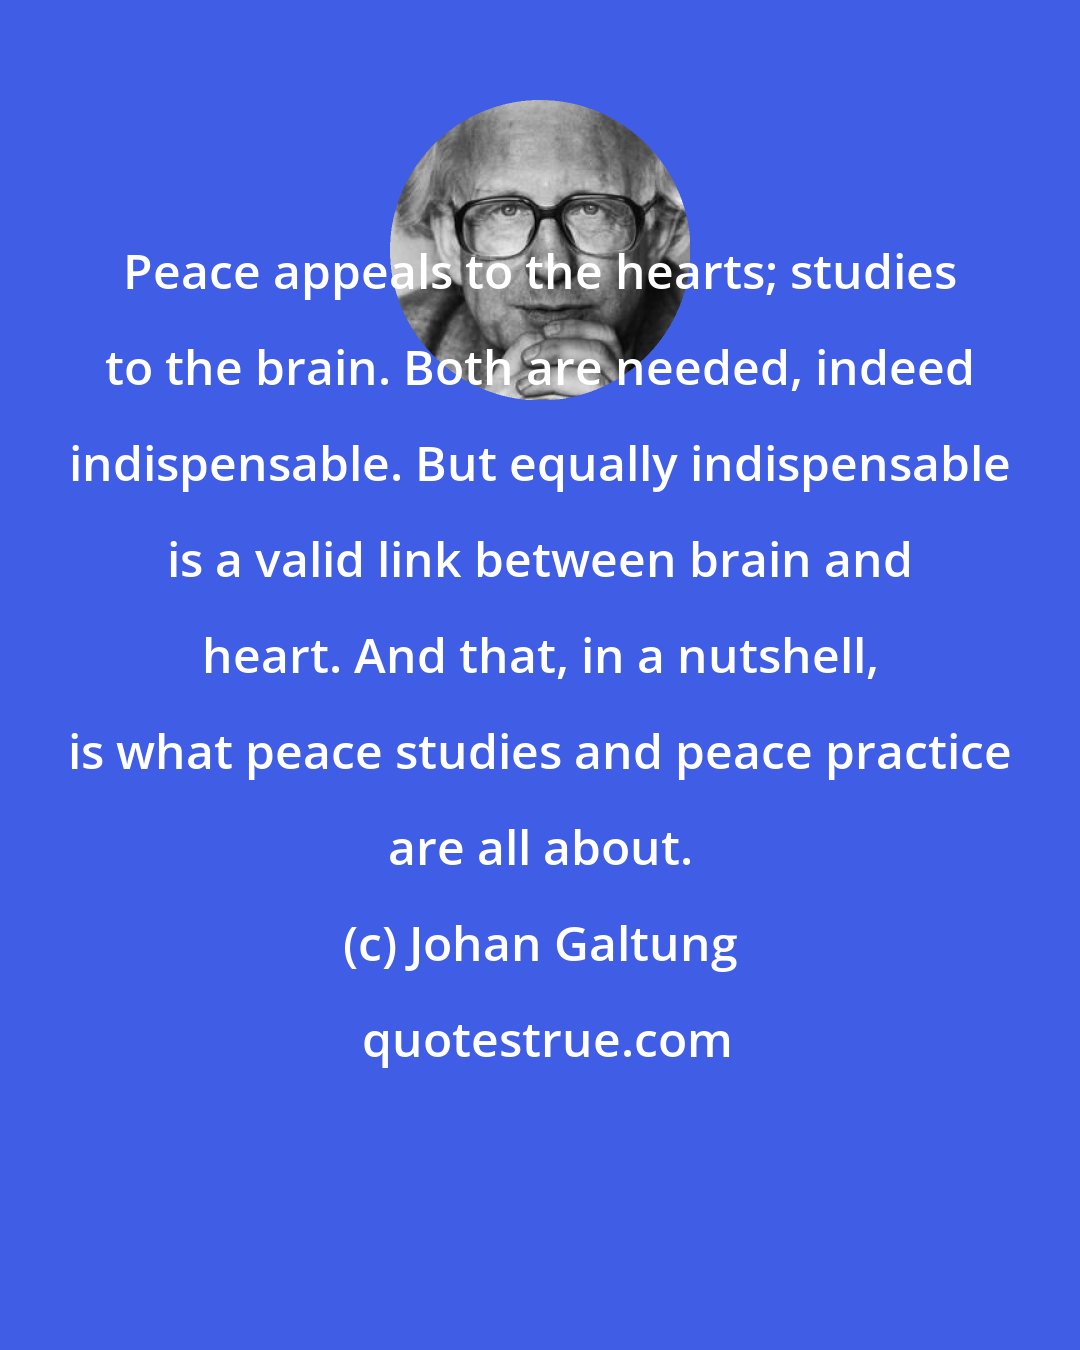 Johan Galtung: Peace appeals to the hearts; studies to the brain. Both are needed, indeed indispensable. But equally indispensable is a valid link between brain and heart. And that, in a nutshell, is what peace studies and peace practice are all about.